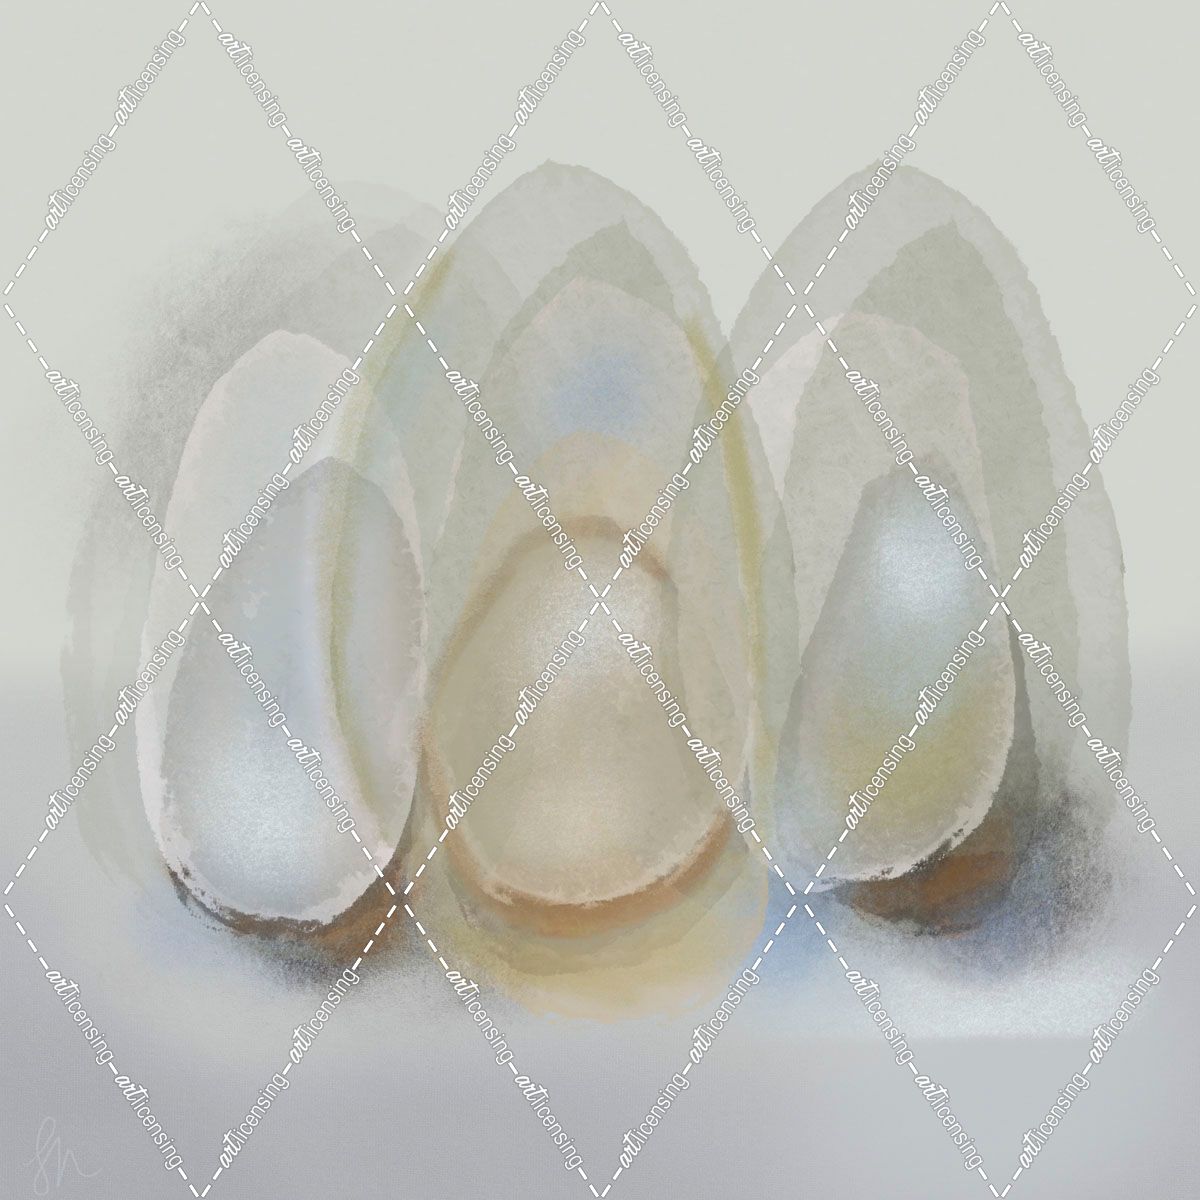 Abstract Eggs